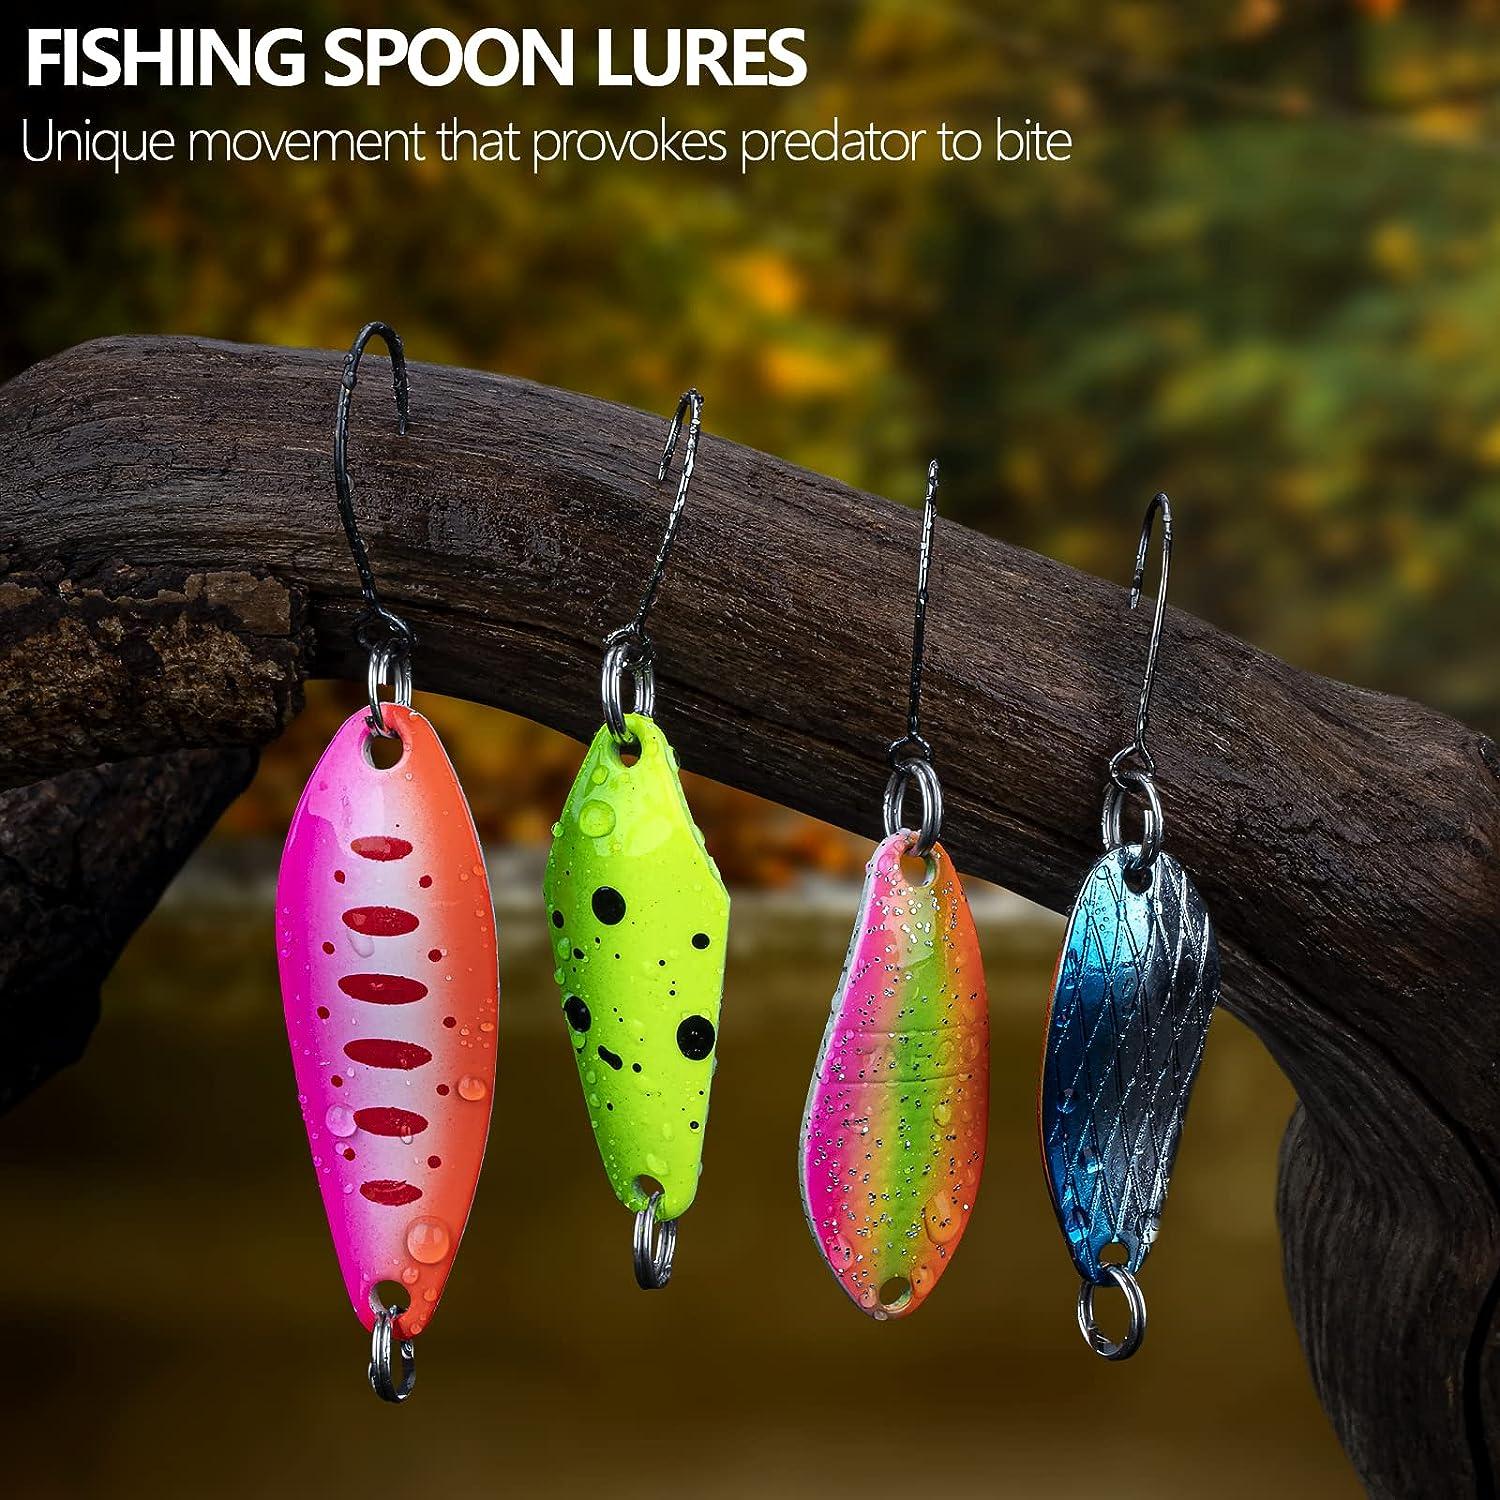 30 PCS Metal Fishing Lures Spinner Spoon Baits Hooks Tackle Attractant